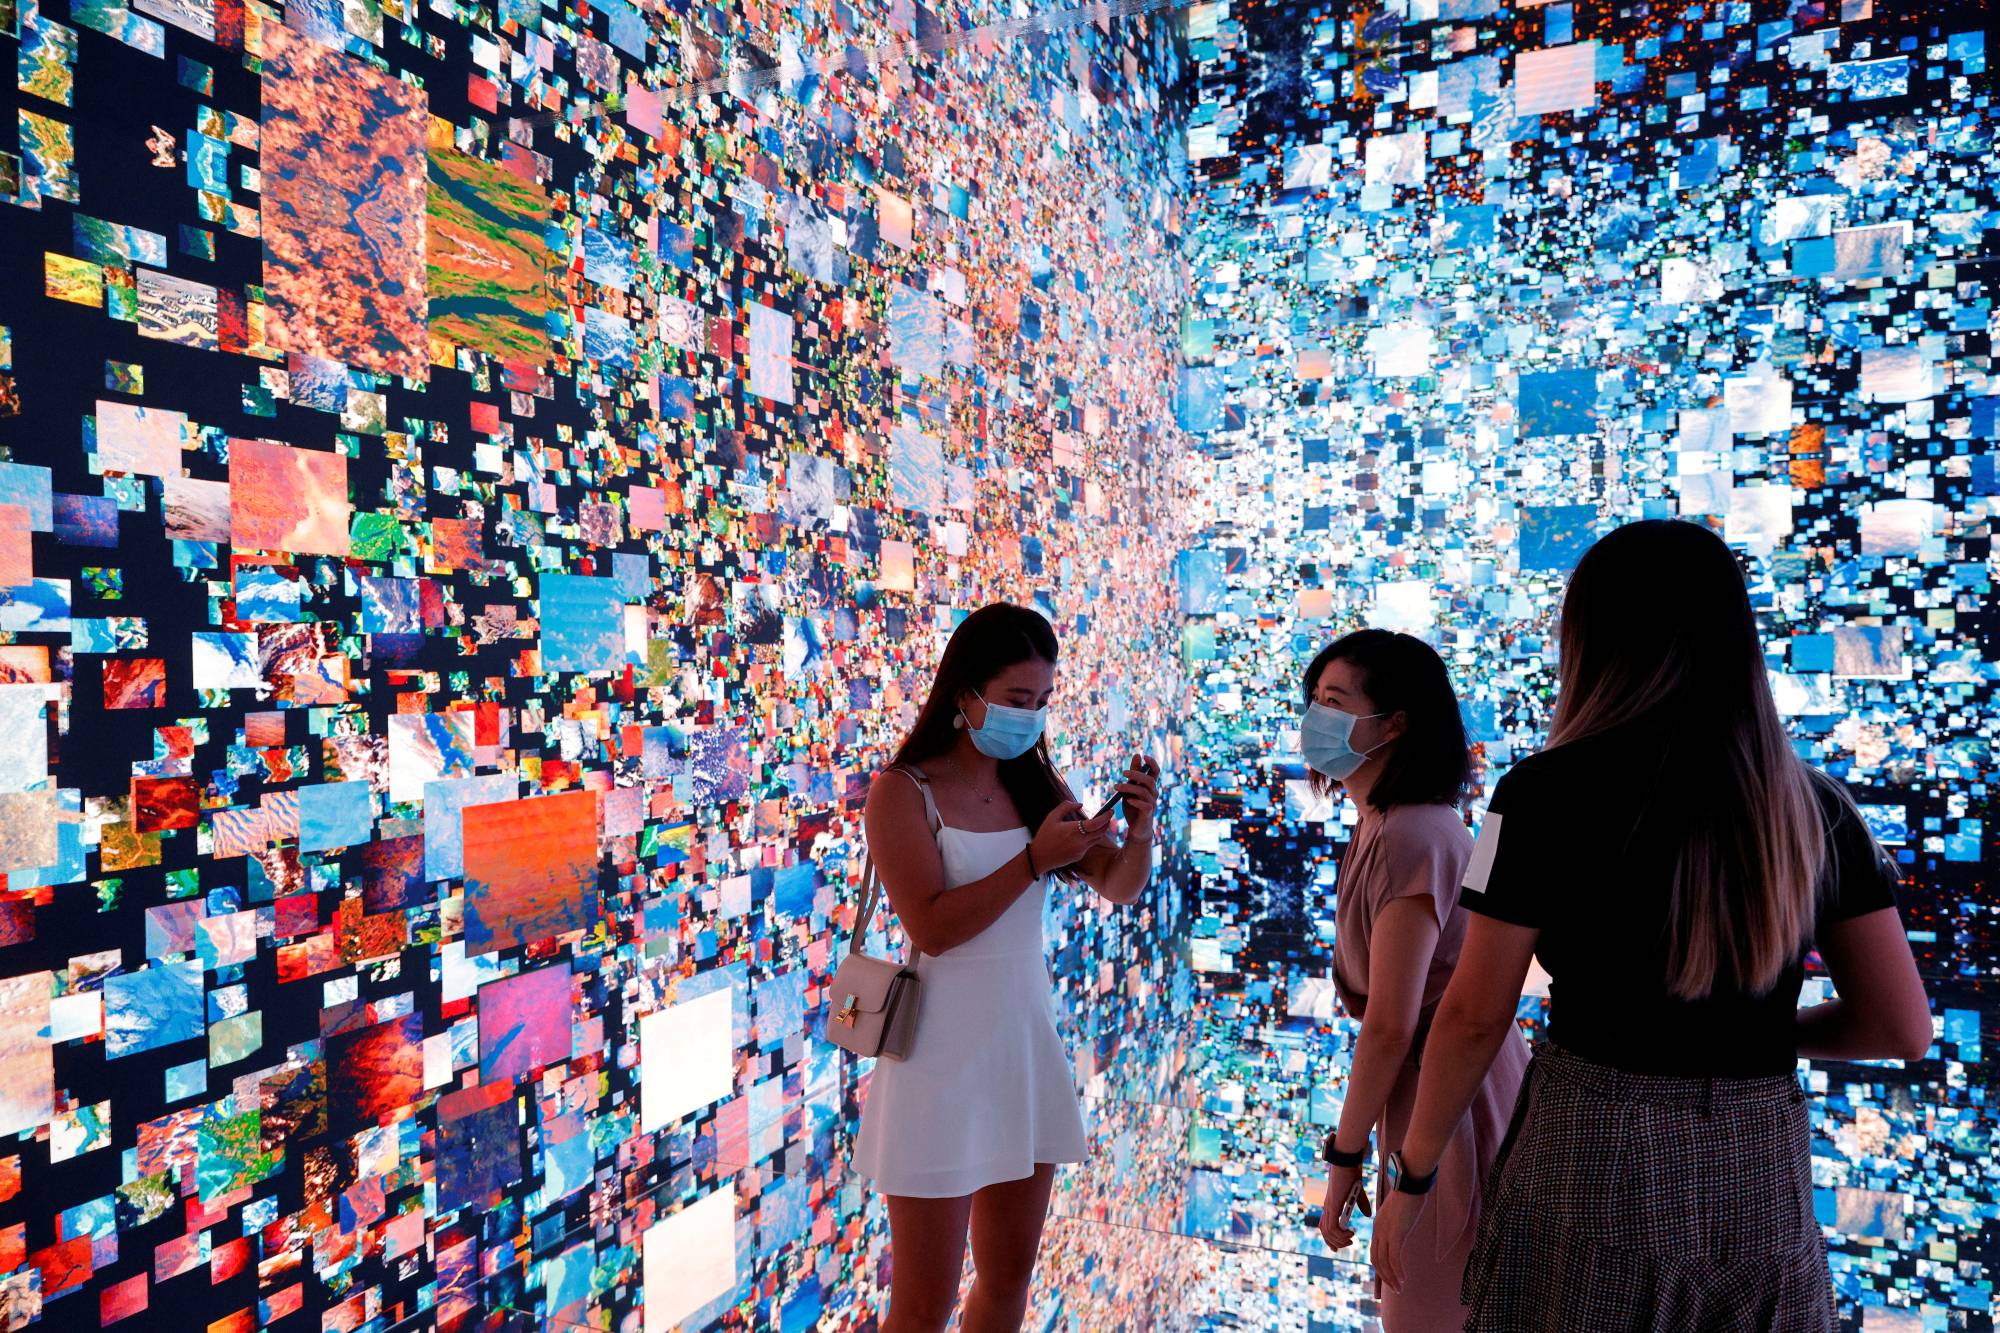 Visitors stand in front of an immersive art installation titled 'Machine Hallucinations - Space: Metaverse' by media artist Refik Anadol, which will be converted into NFT and auctioned online at Sotheby's, at the Digital Art Fair, in Hong Kong. | REUTERS